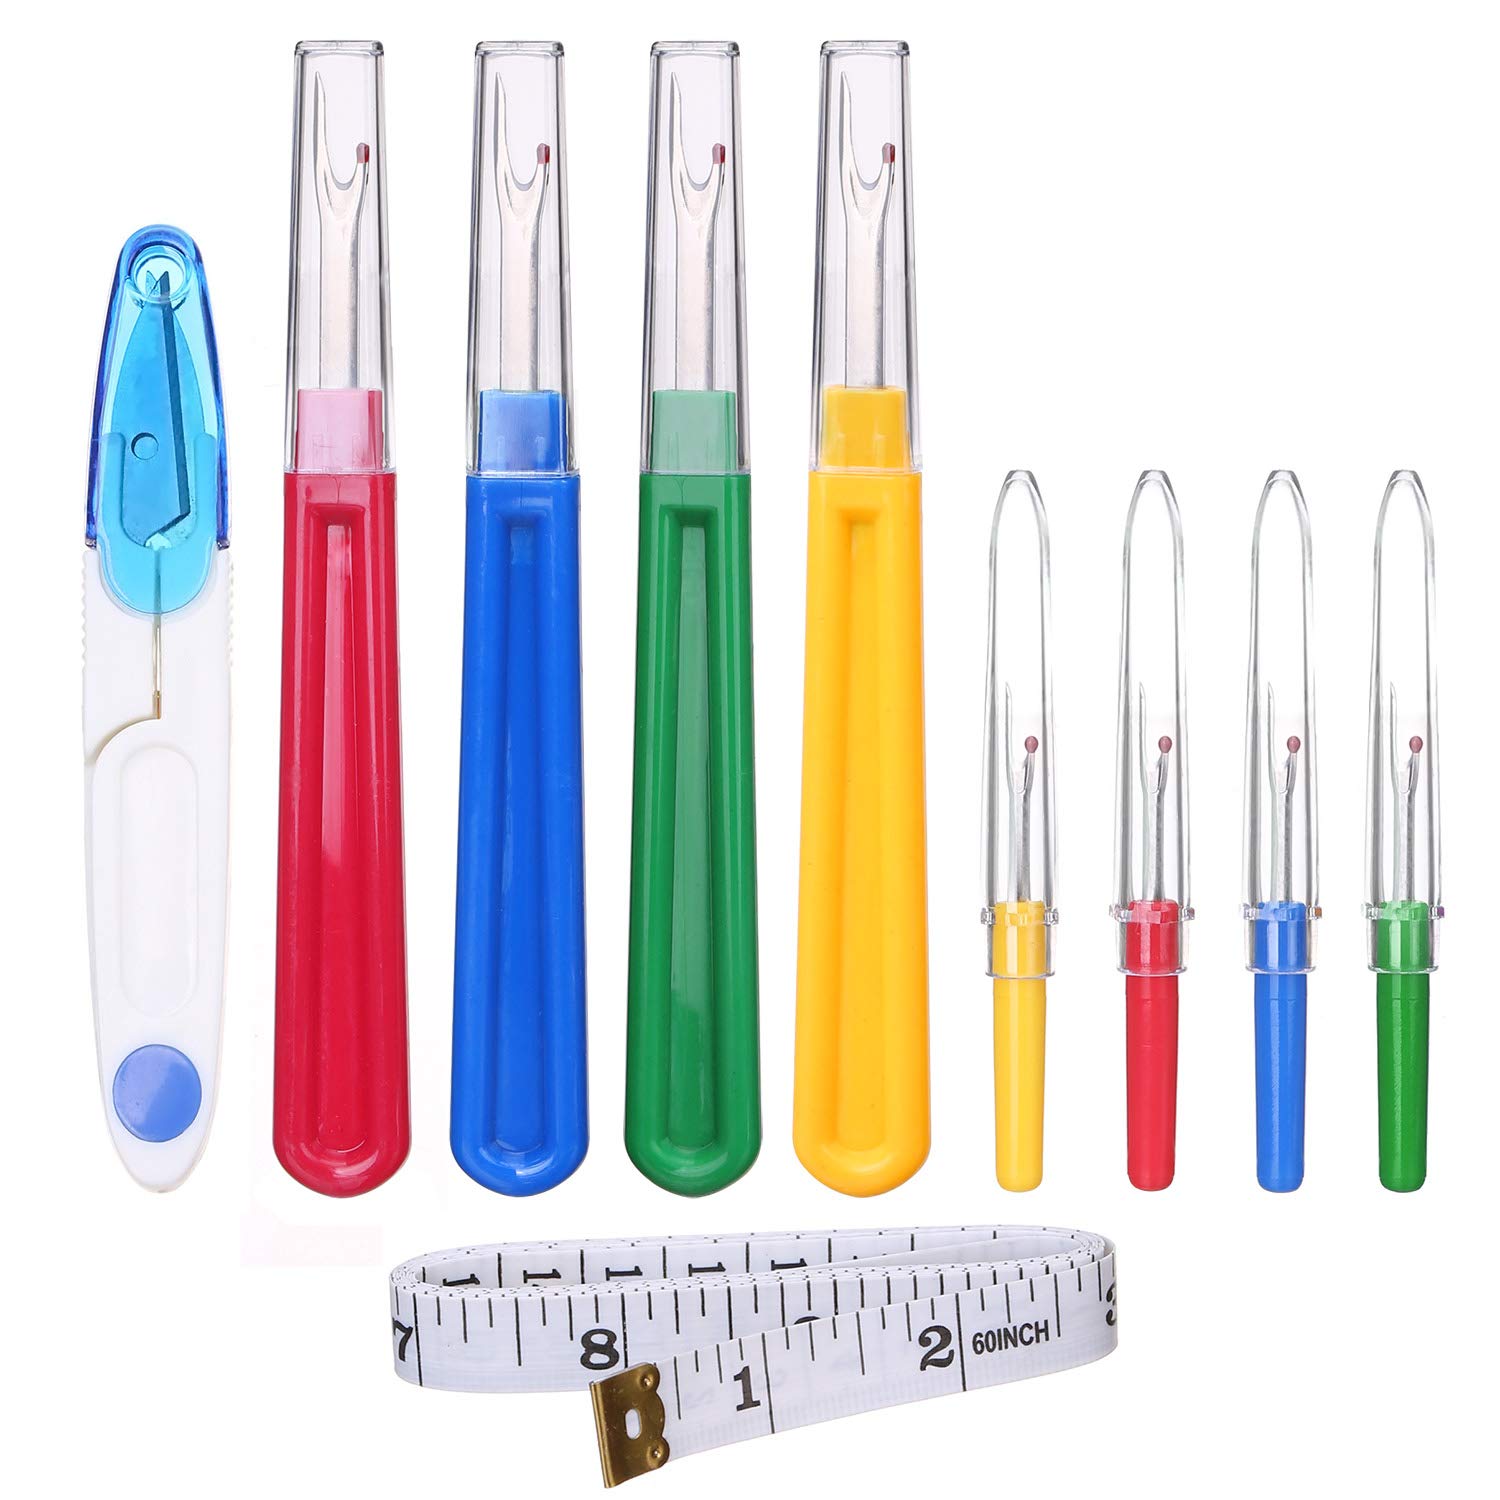 Magideal 4 Pieces Assorted Steel Seam Ripper Sewing Tool Stitch Thread Unpicker Button Hole Cutter with Plastic Handle